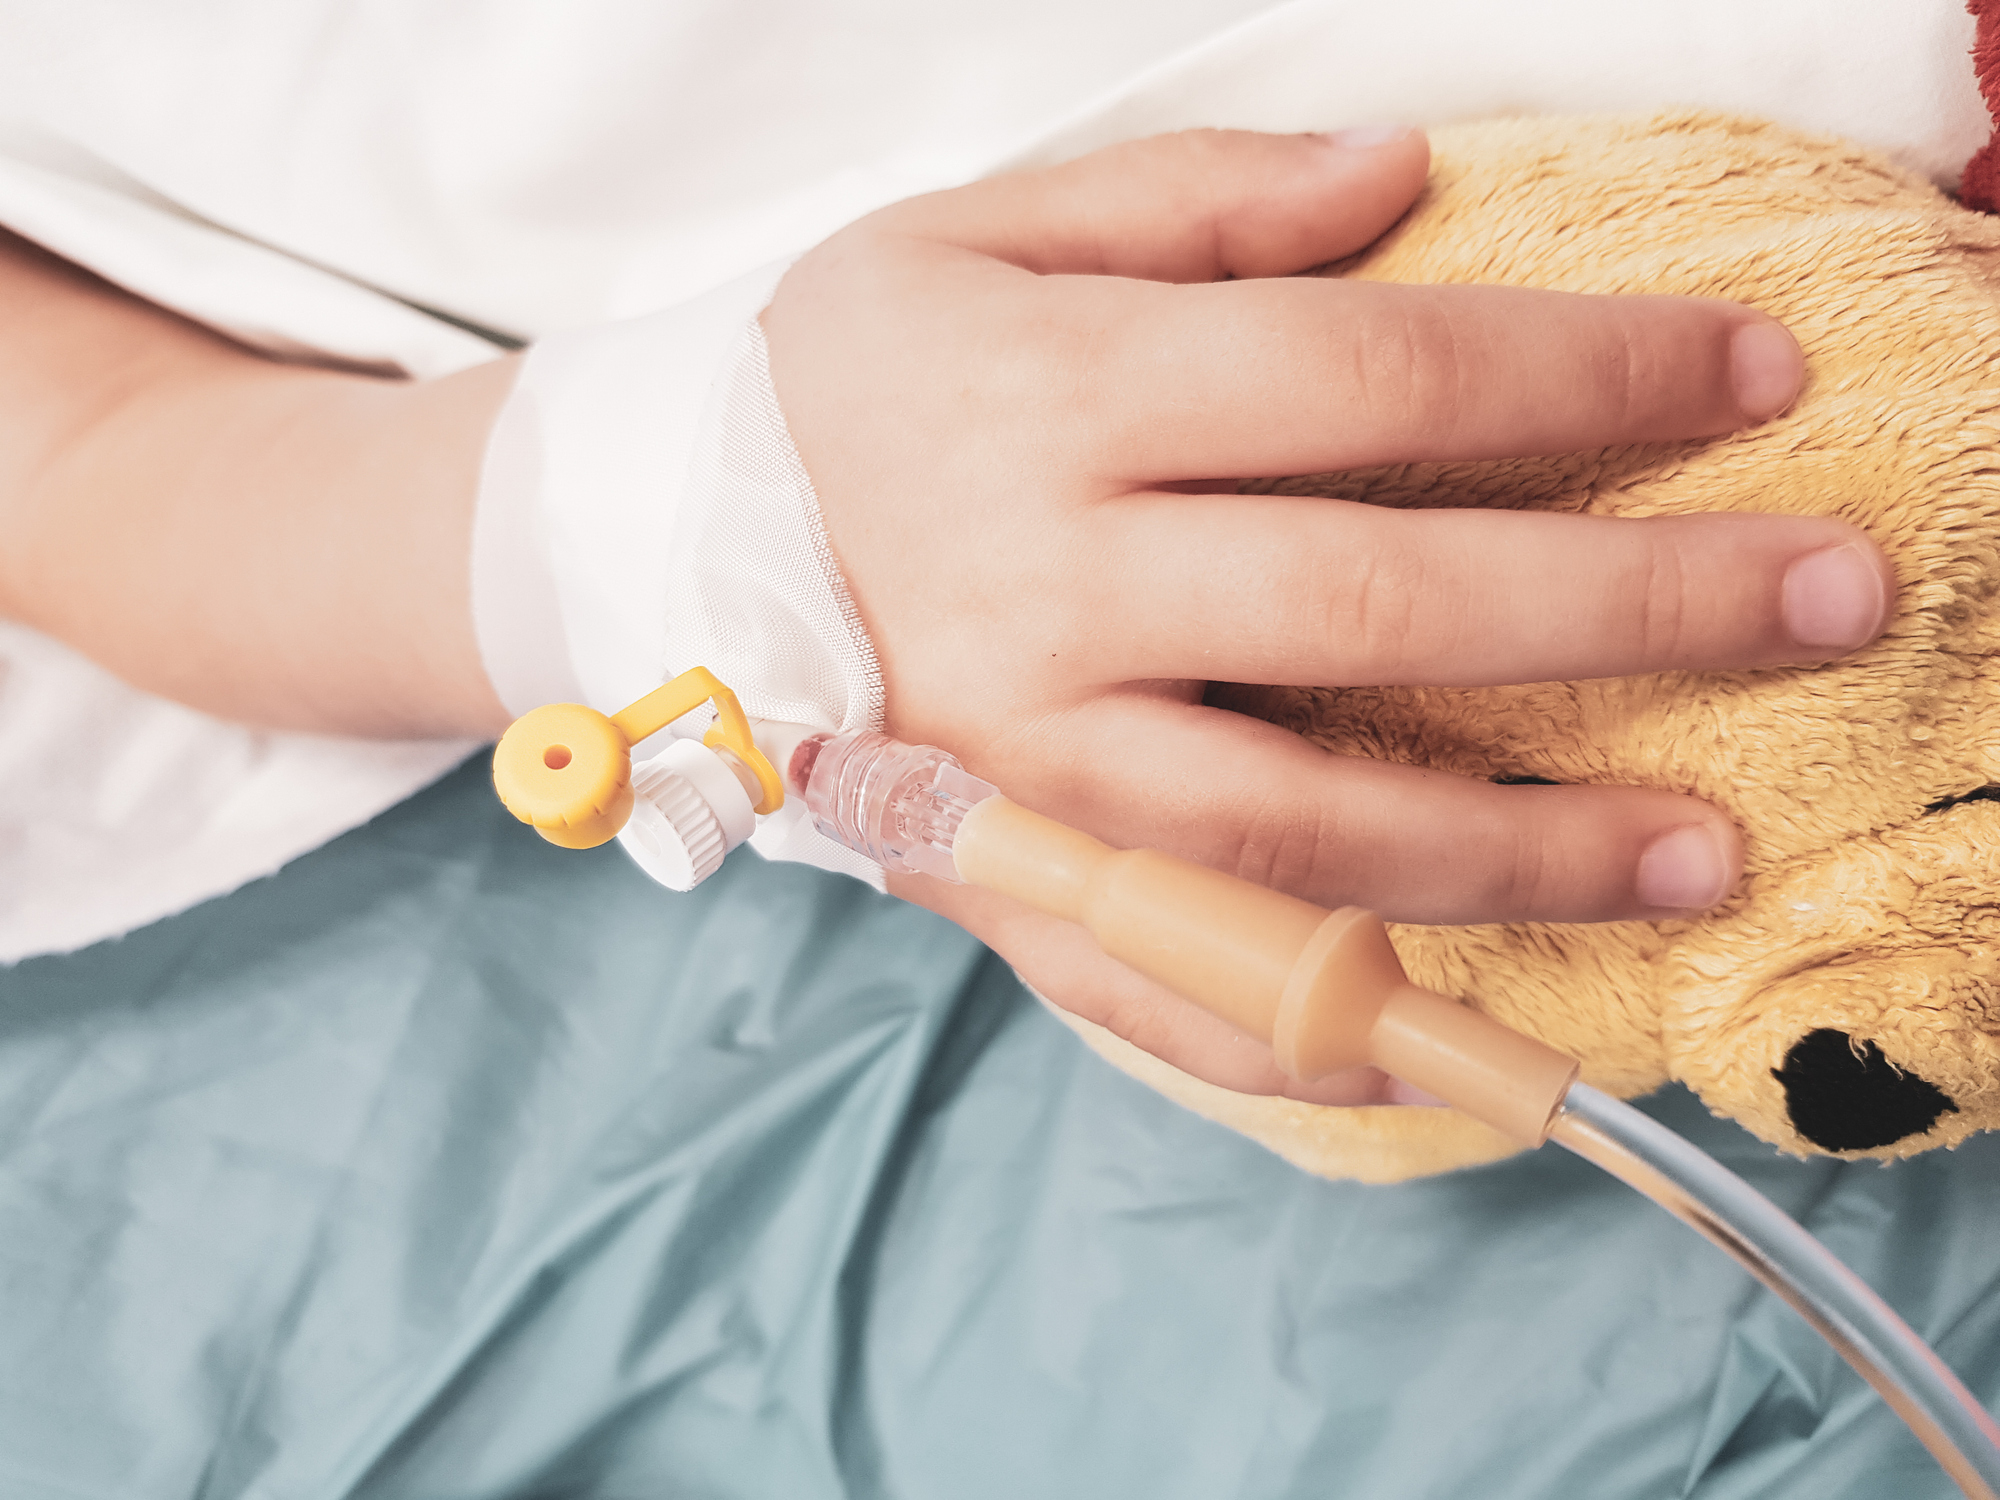 Hand of an ill little girl in a pediatric hospital reserve, with a cannula and holding a teddy bear